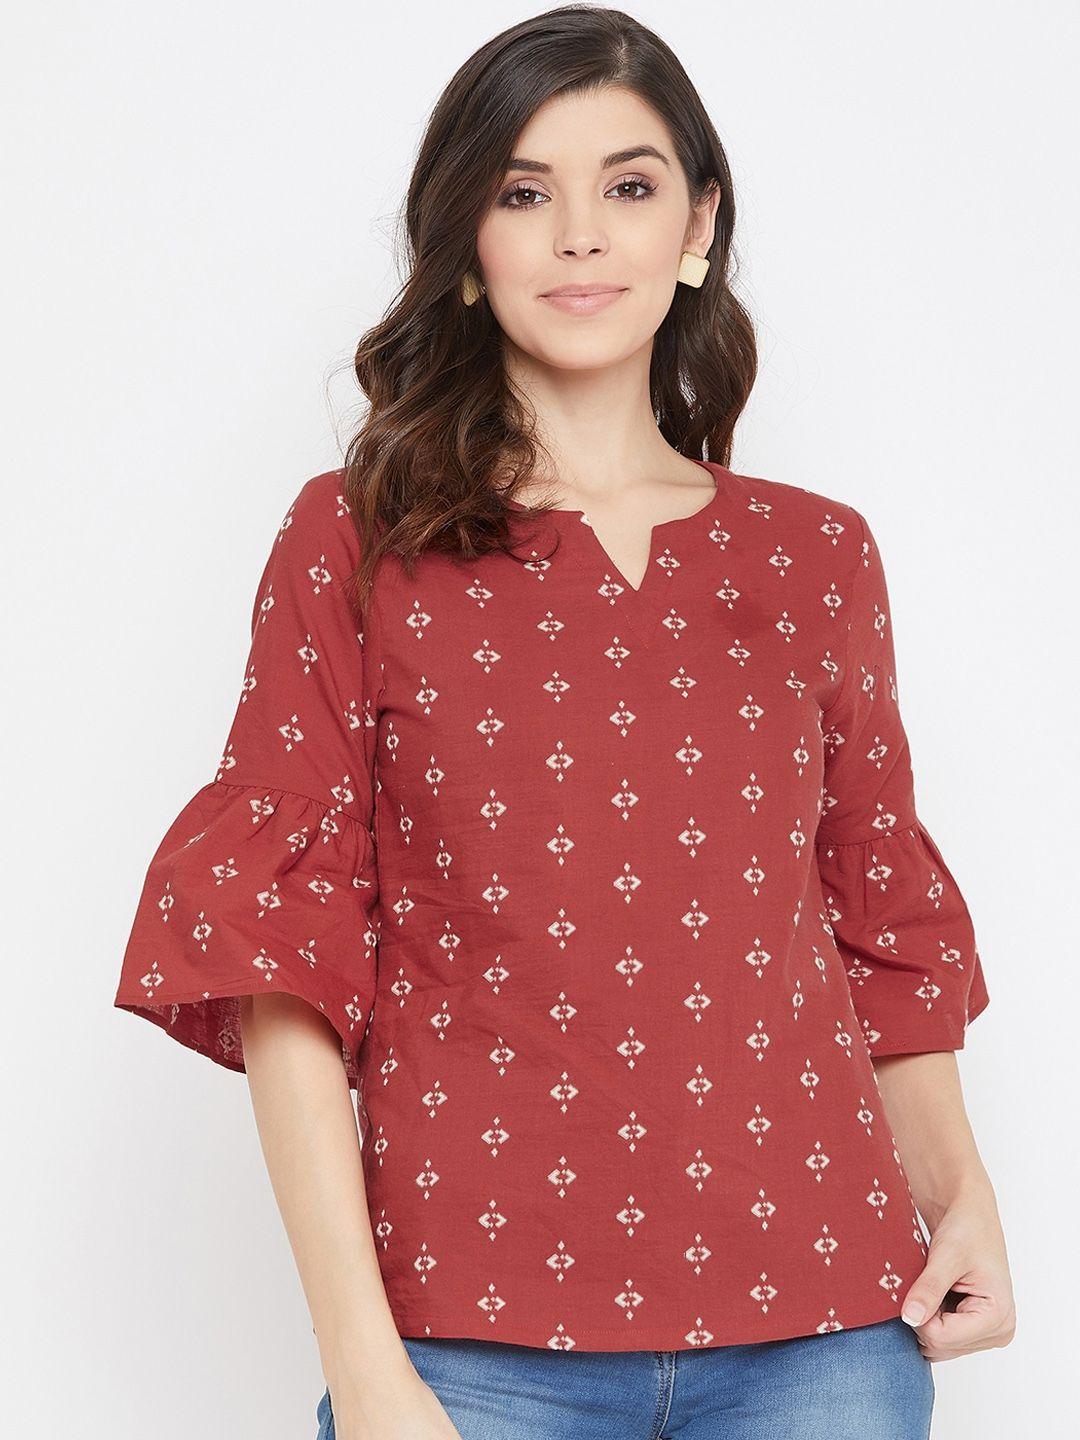 color-cocktail-women-red-printed-pure-cotton-top